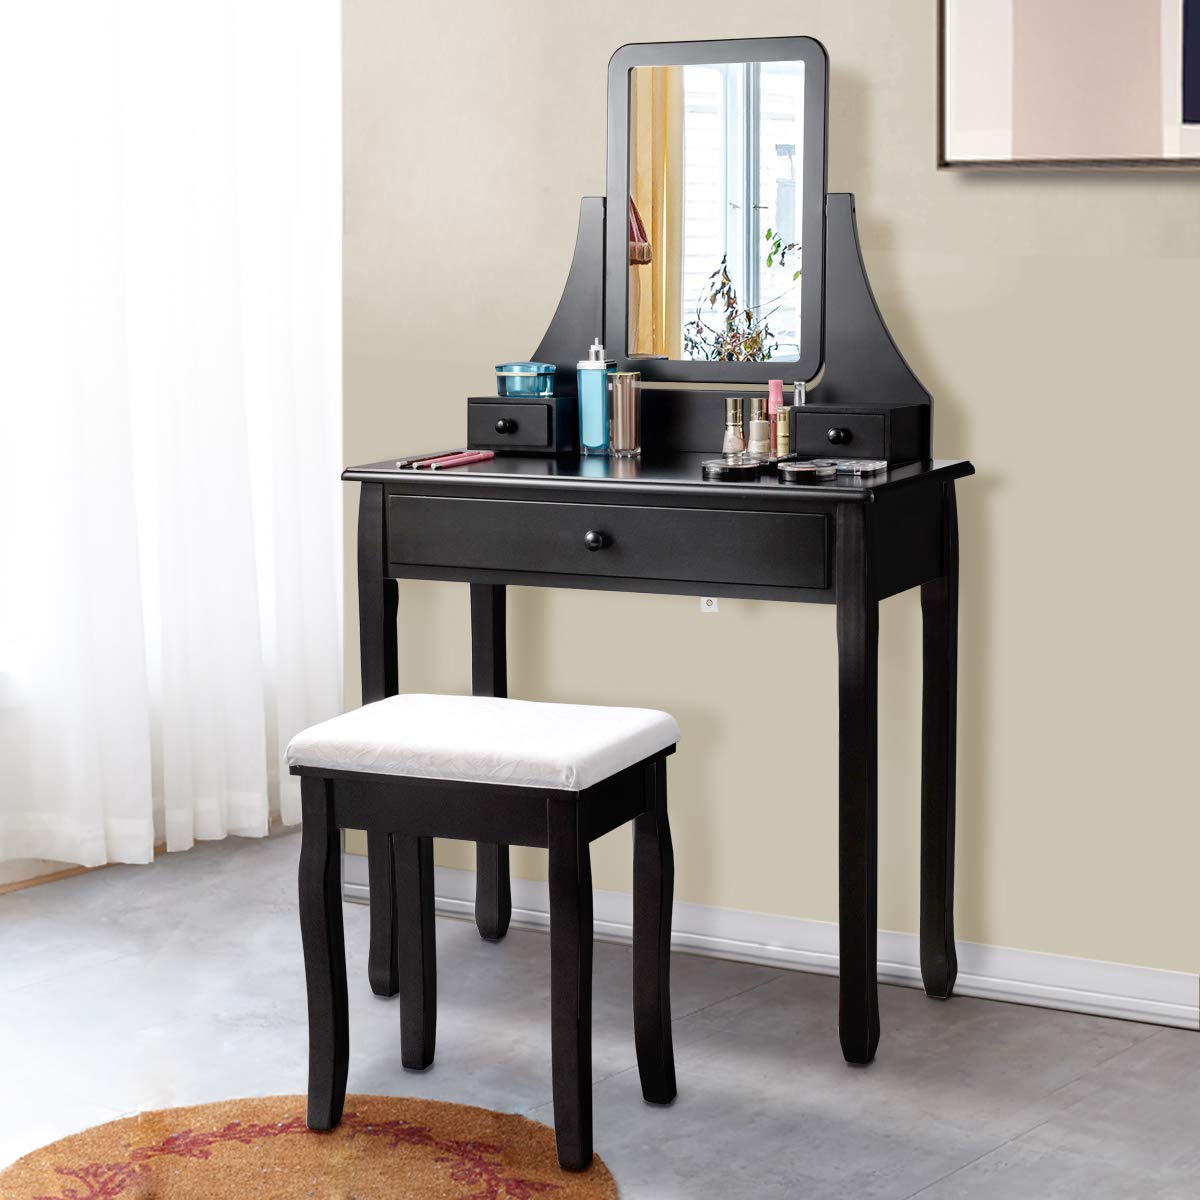 Giantex Black Vanity Set with Large Drawer and 2 Removable Dividers